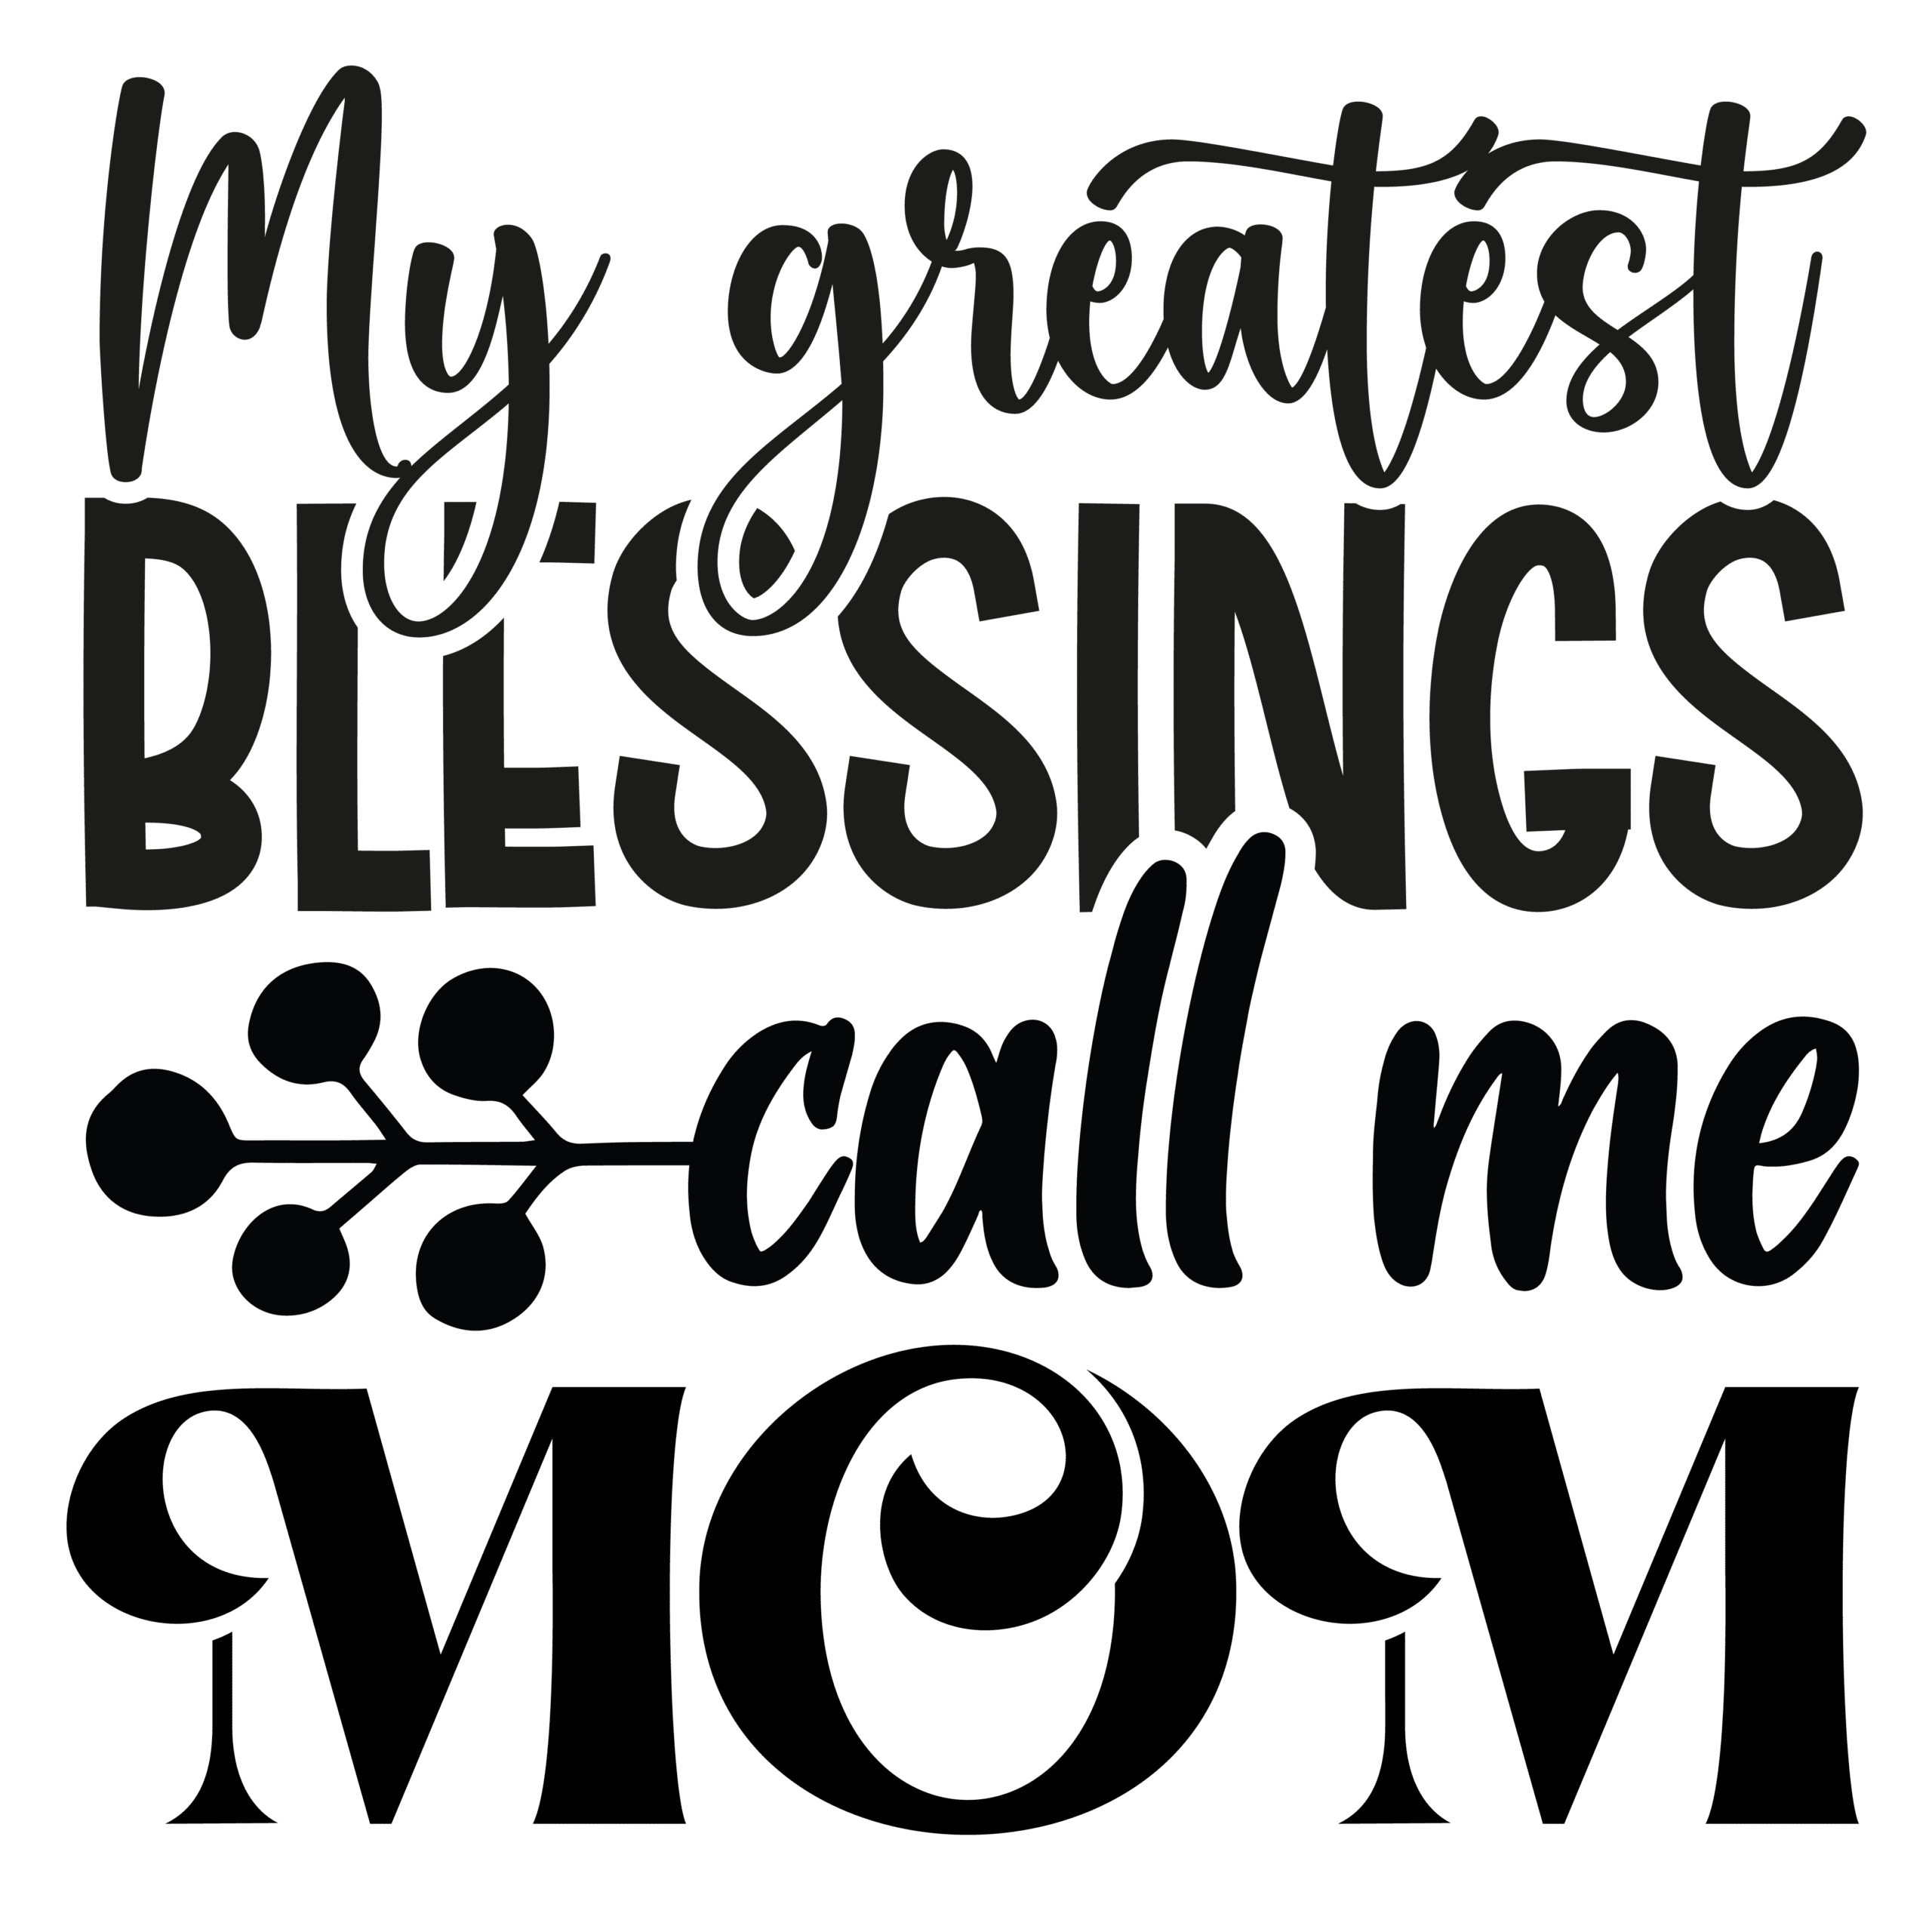 My greatest blessings call me mom-01